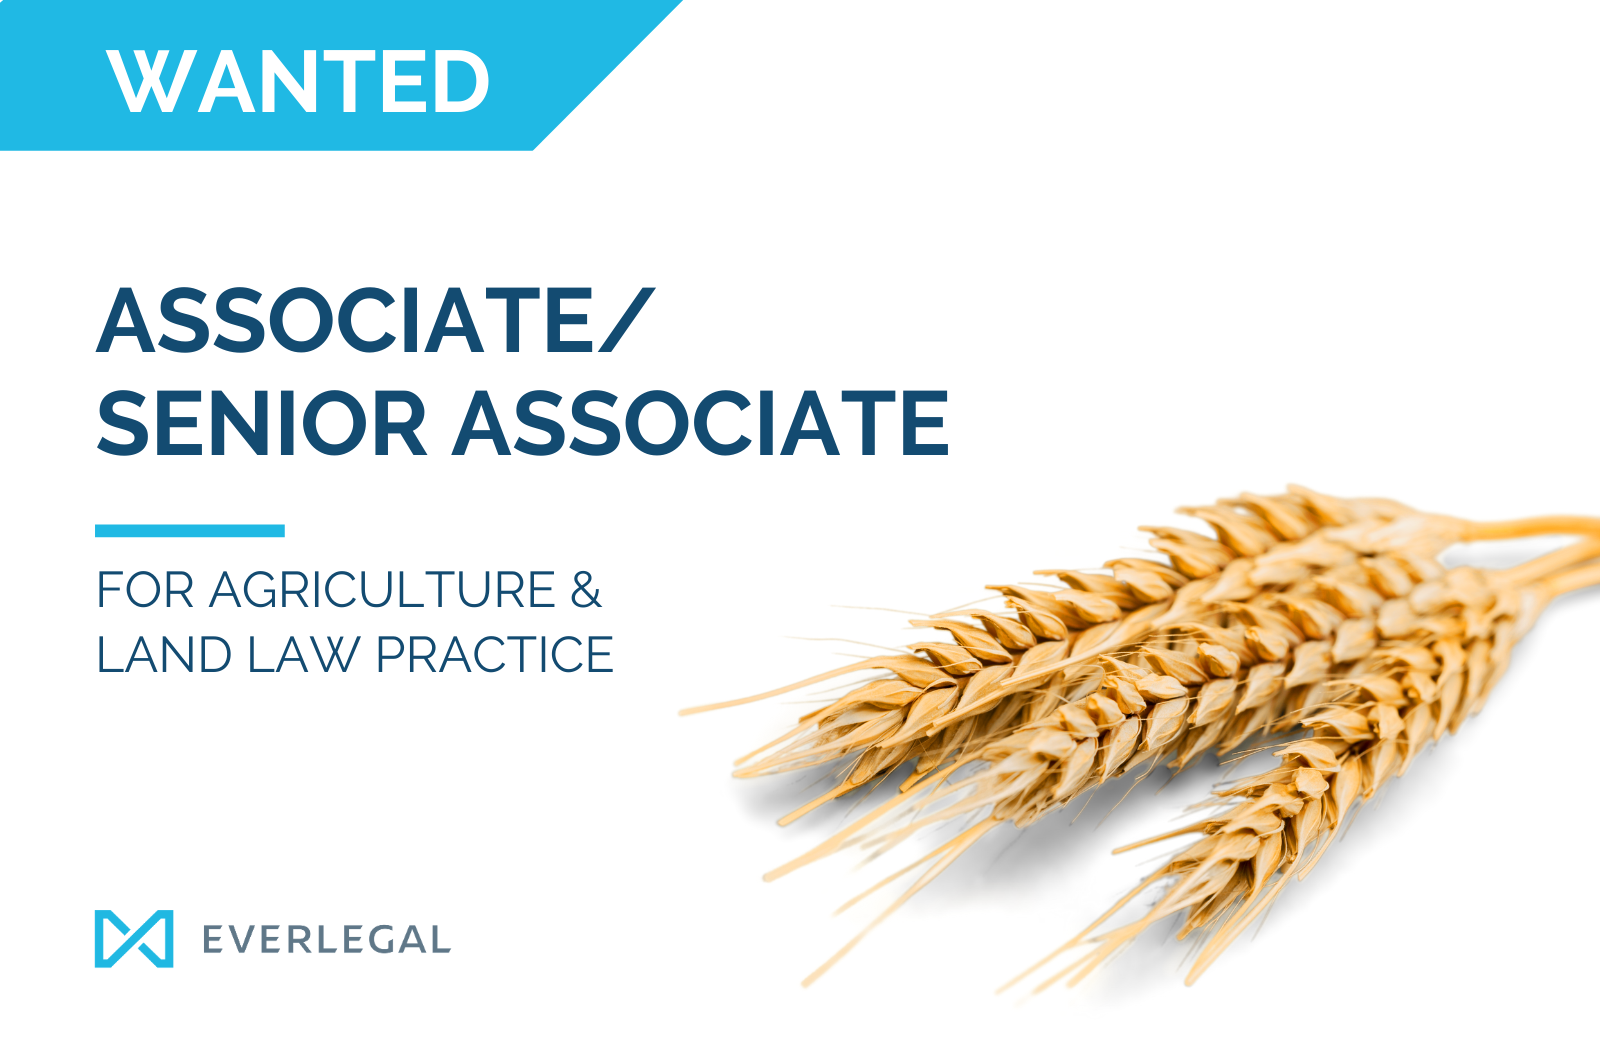 WANTED: Associate/Senior Associate for Agriculture and Land Law Practice